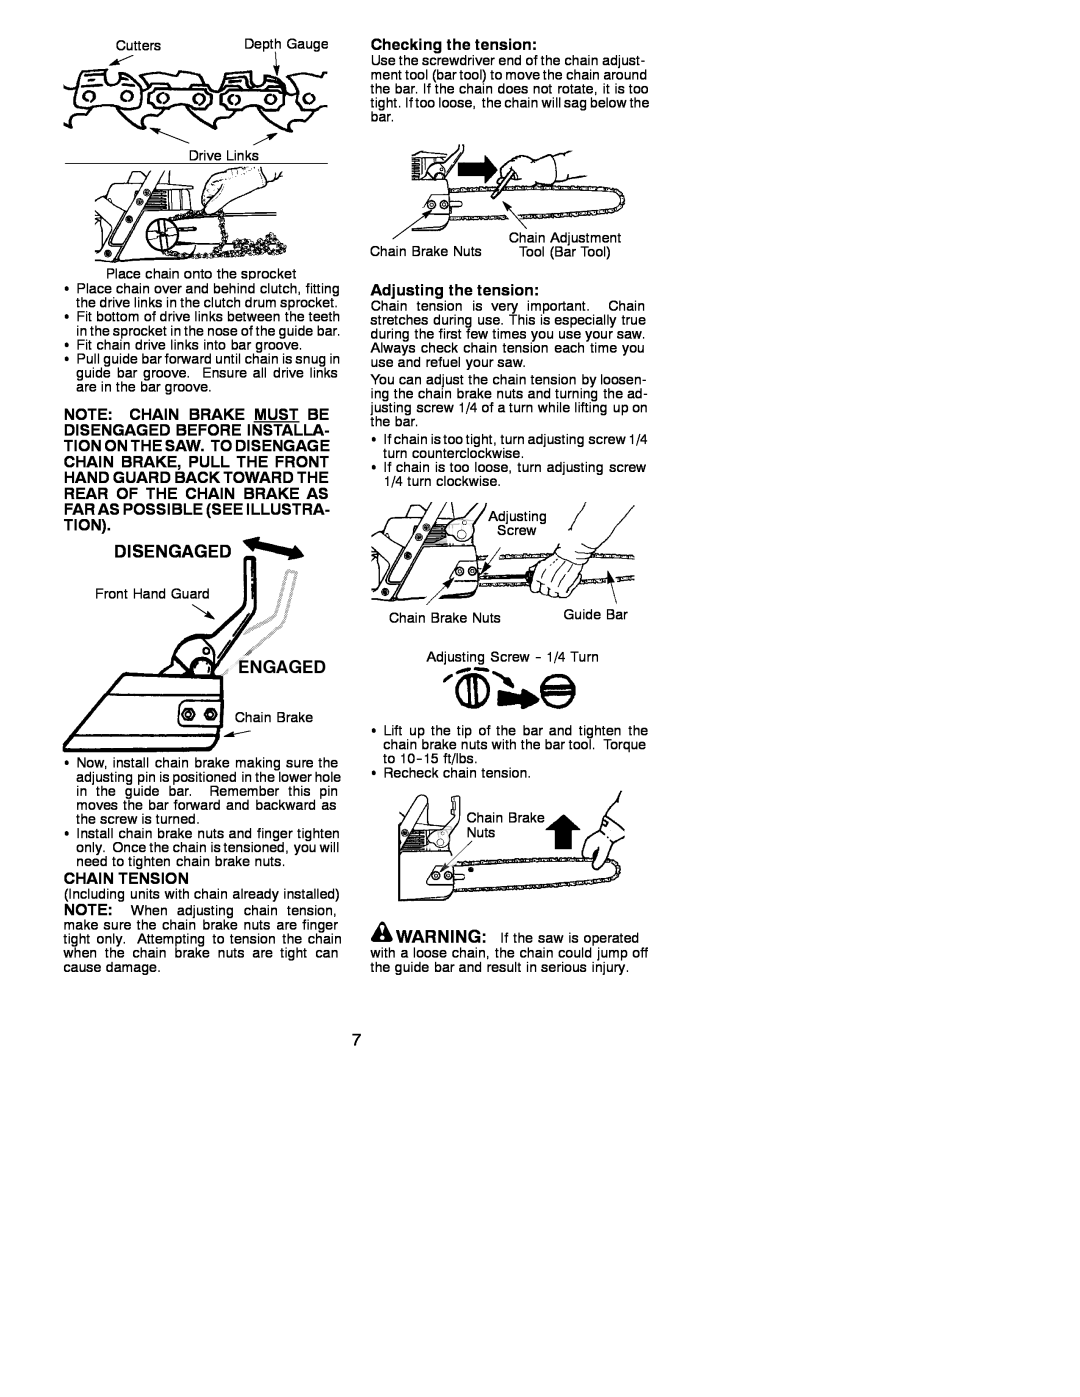 Poulan 530086528 instruction manual Disengaged, Engaged, Checking the tension, Chain Tension, Adjusting the tension 